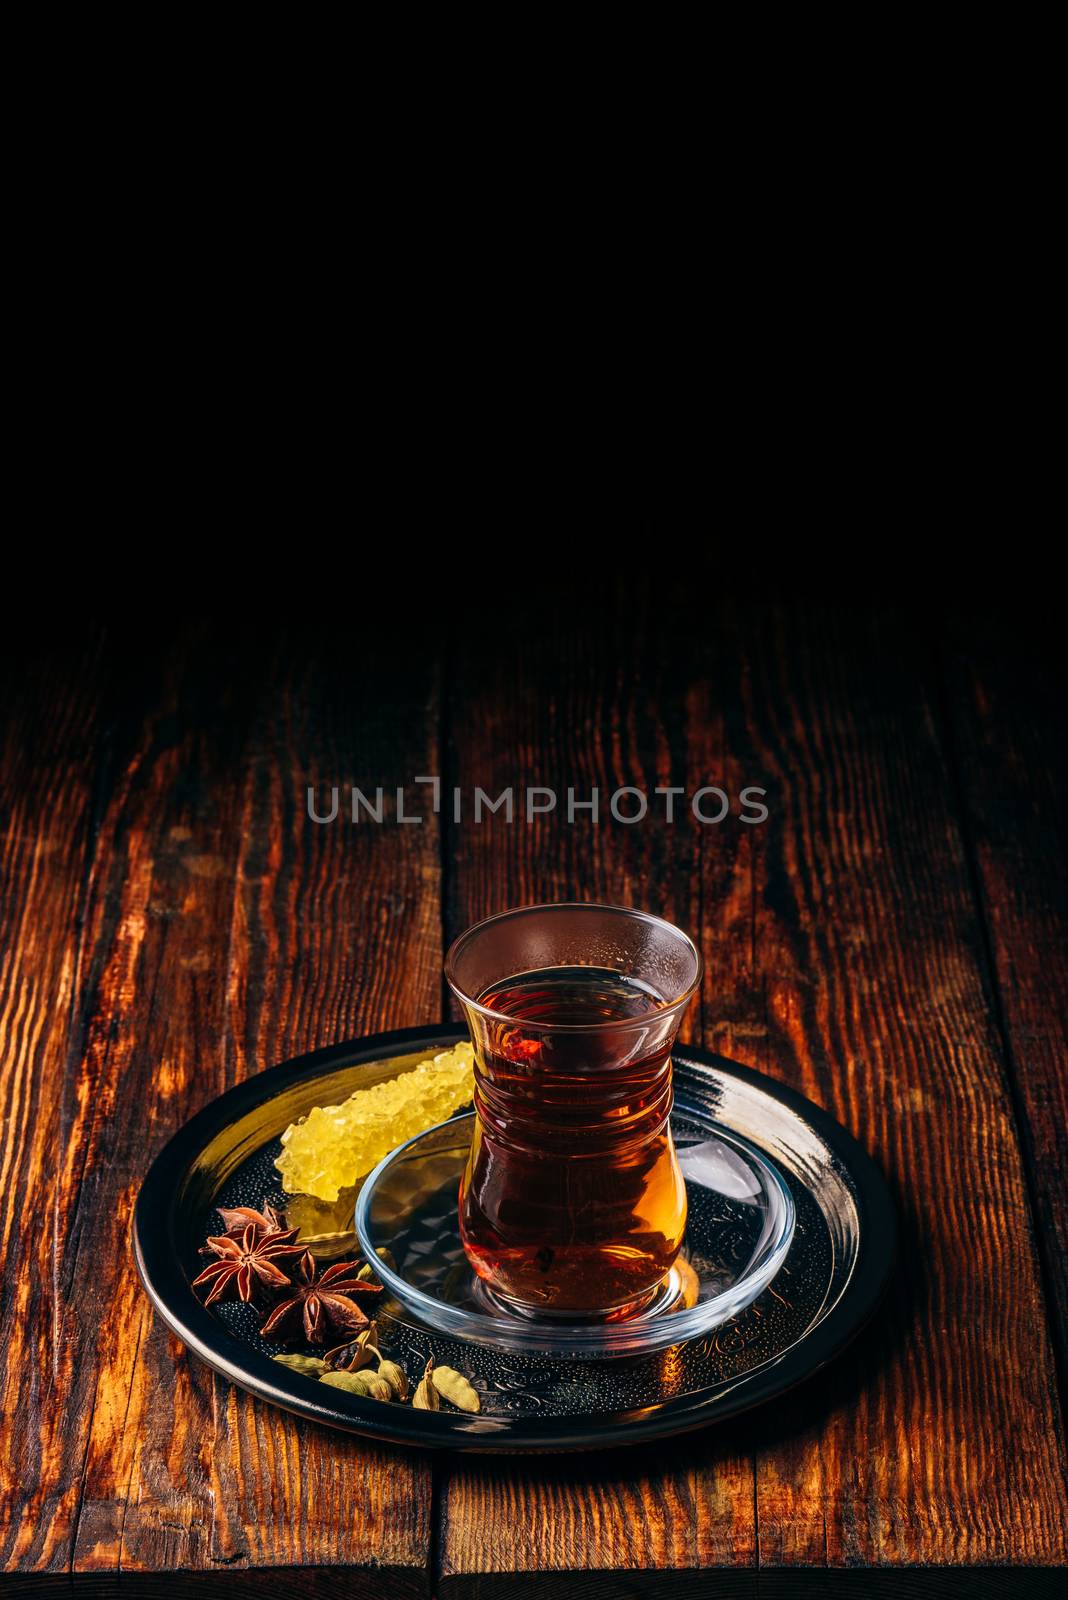 Black tea in armudu glass with star anise and green cardamom with crystal sugar on metal tray over wooden surface. Copy space